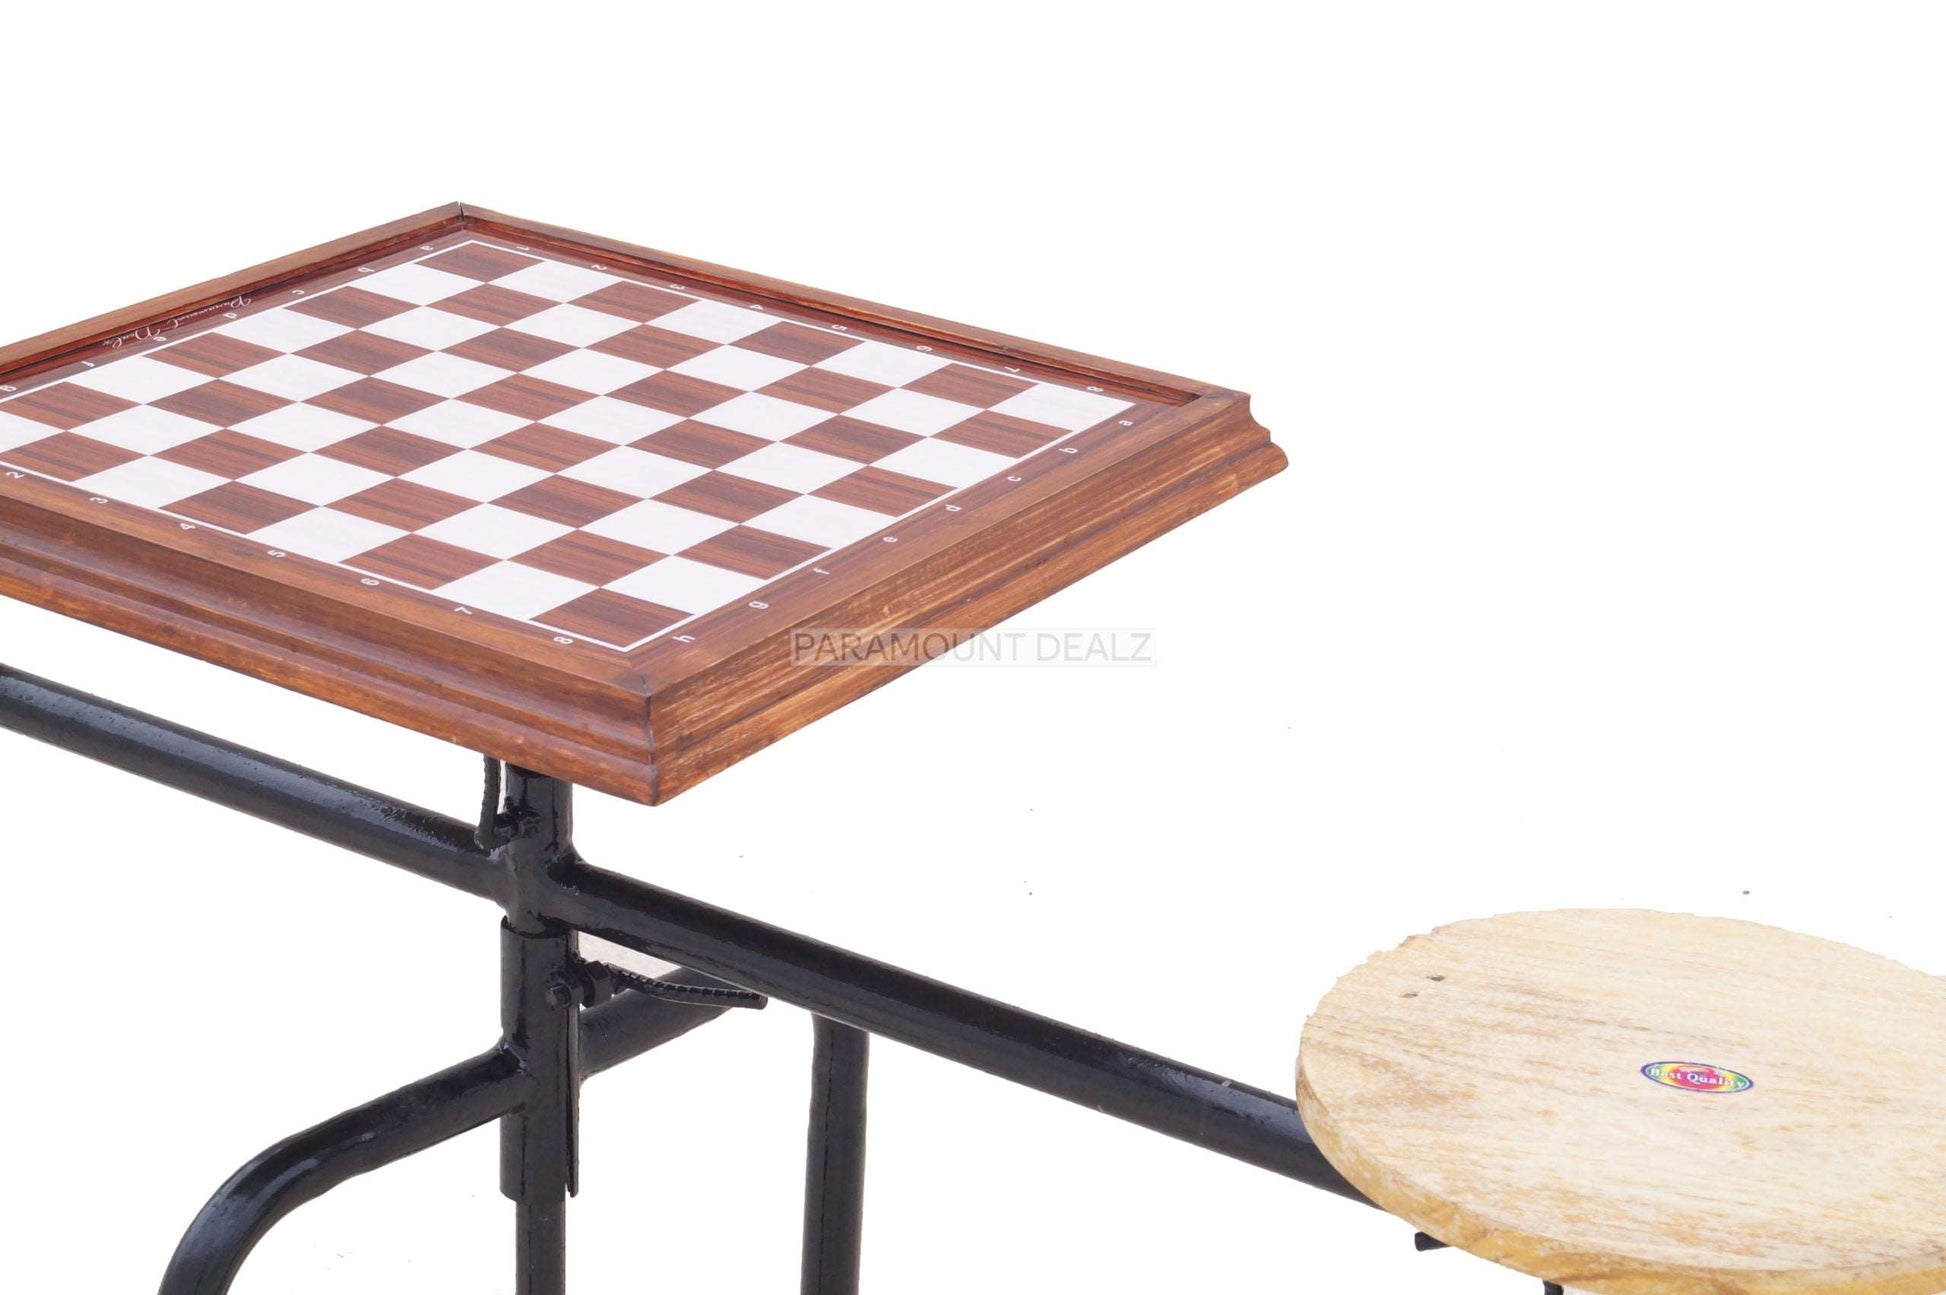 Metallic Premium Chess Table with 2 attached stools